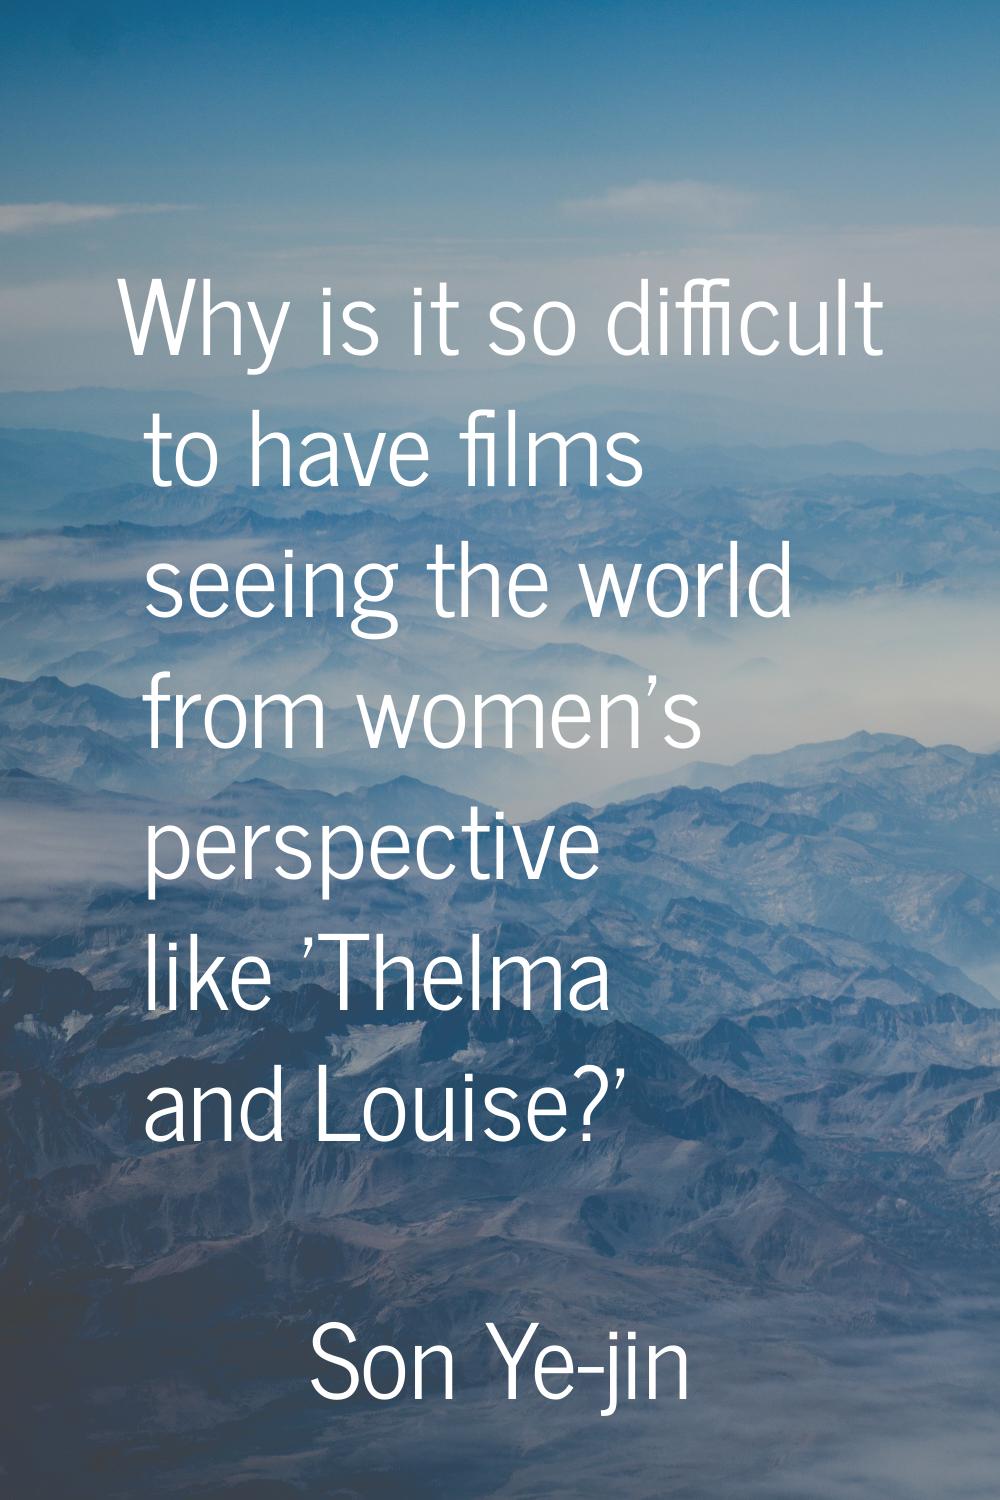 Why is it so difficult to have films seeing the world from women's perspective like 'Thelma and Lou